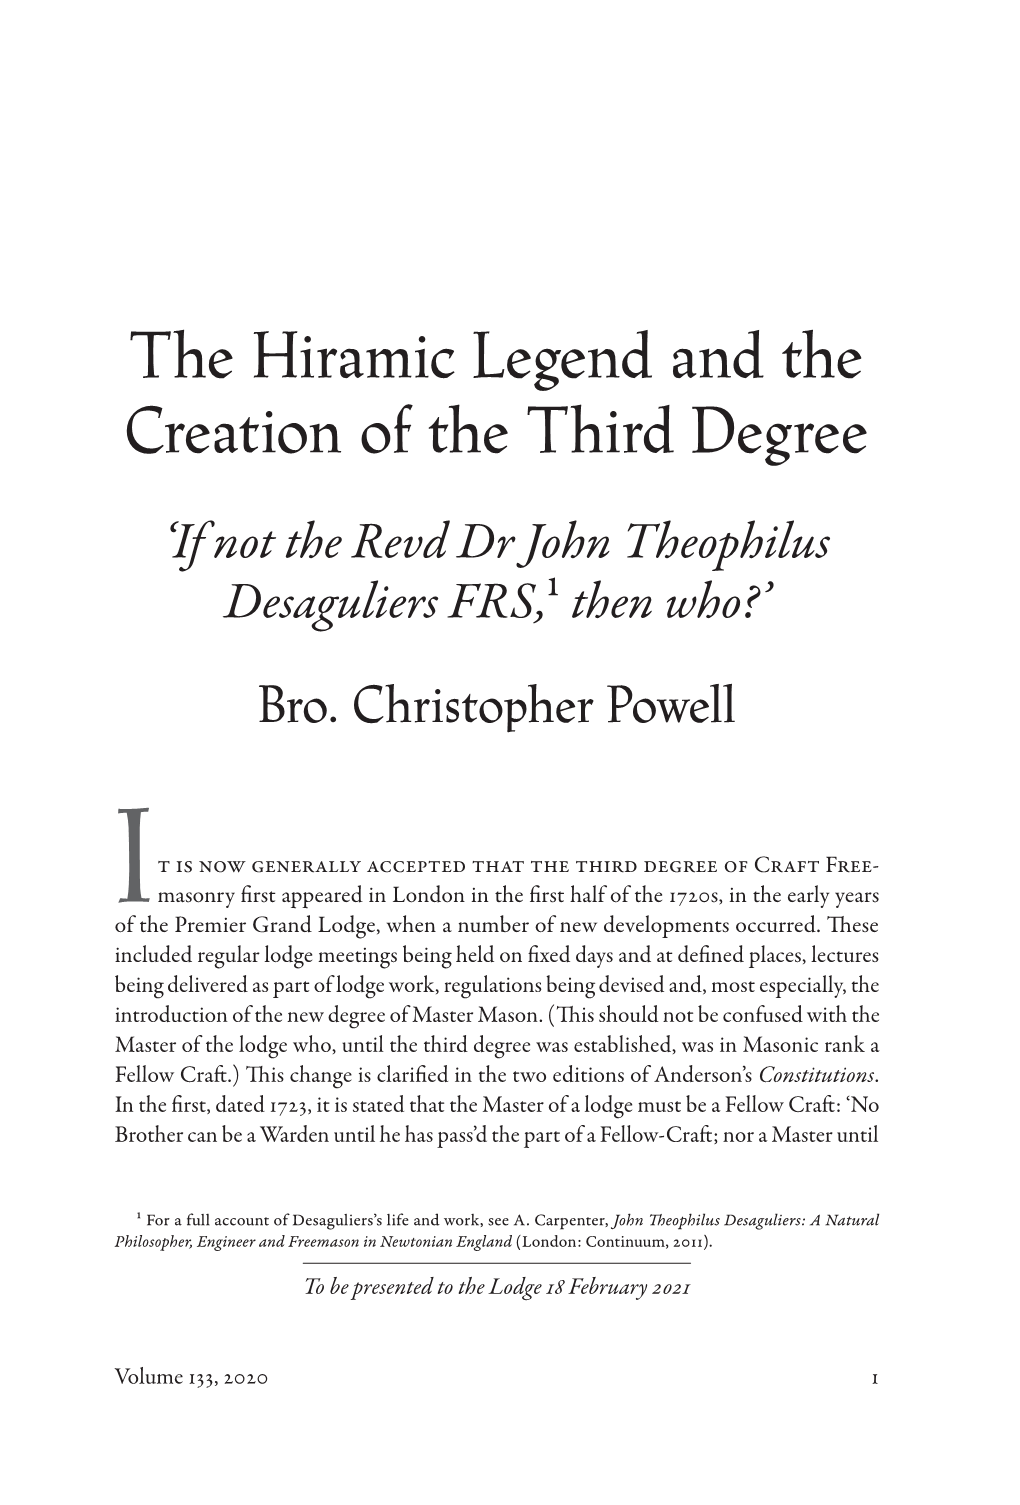 The Hiramic Legend and the Creation of the Third Degree